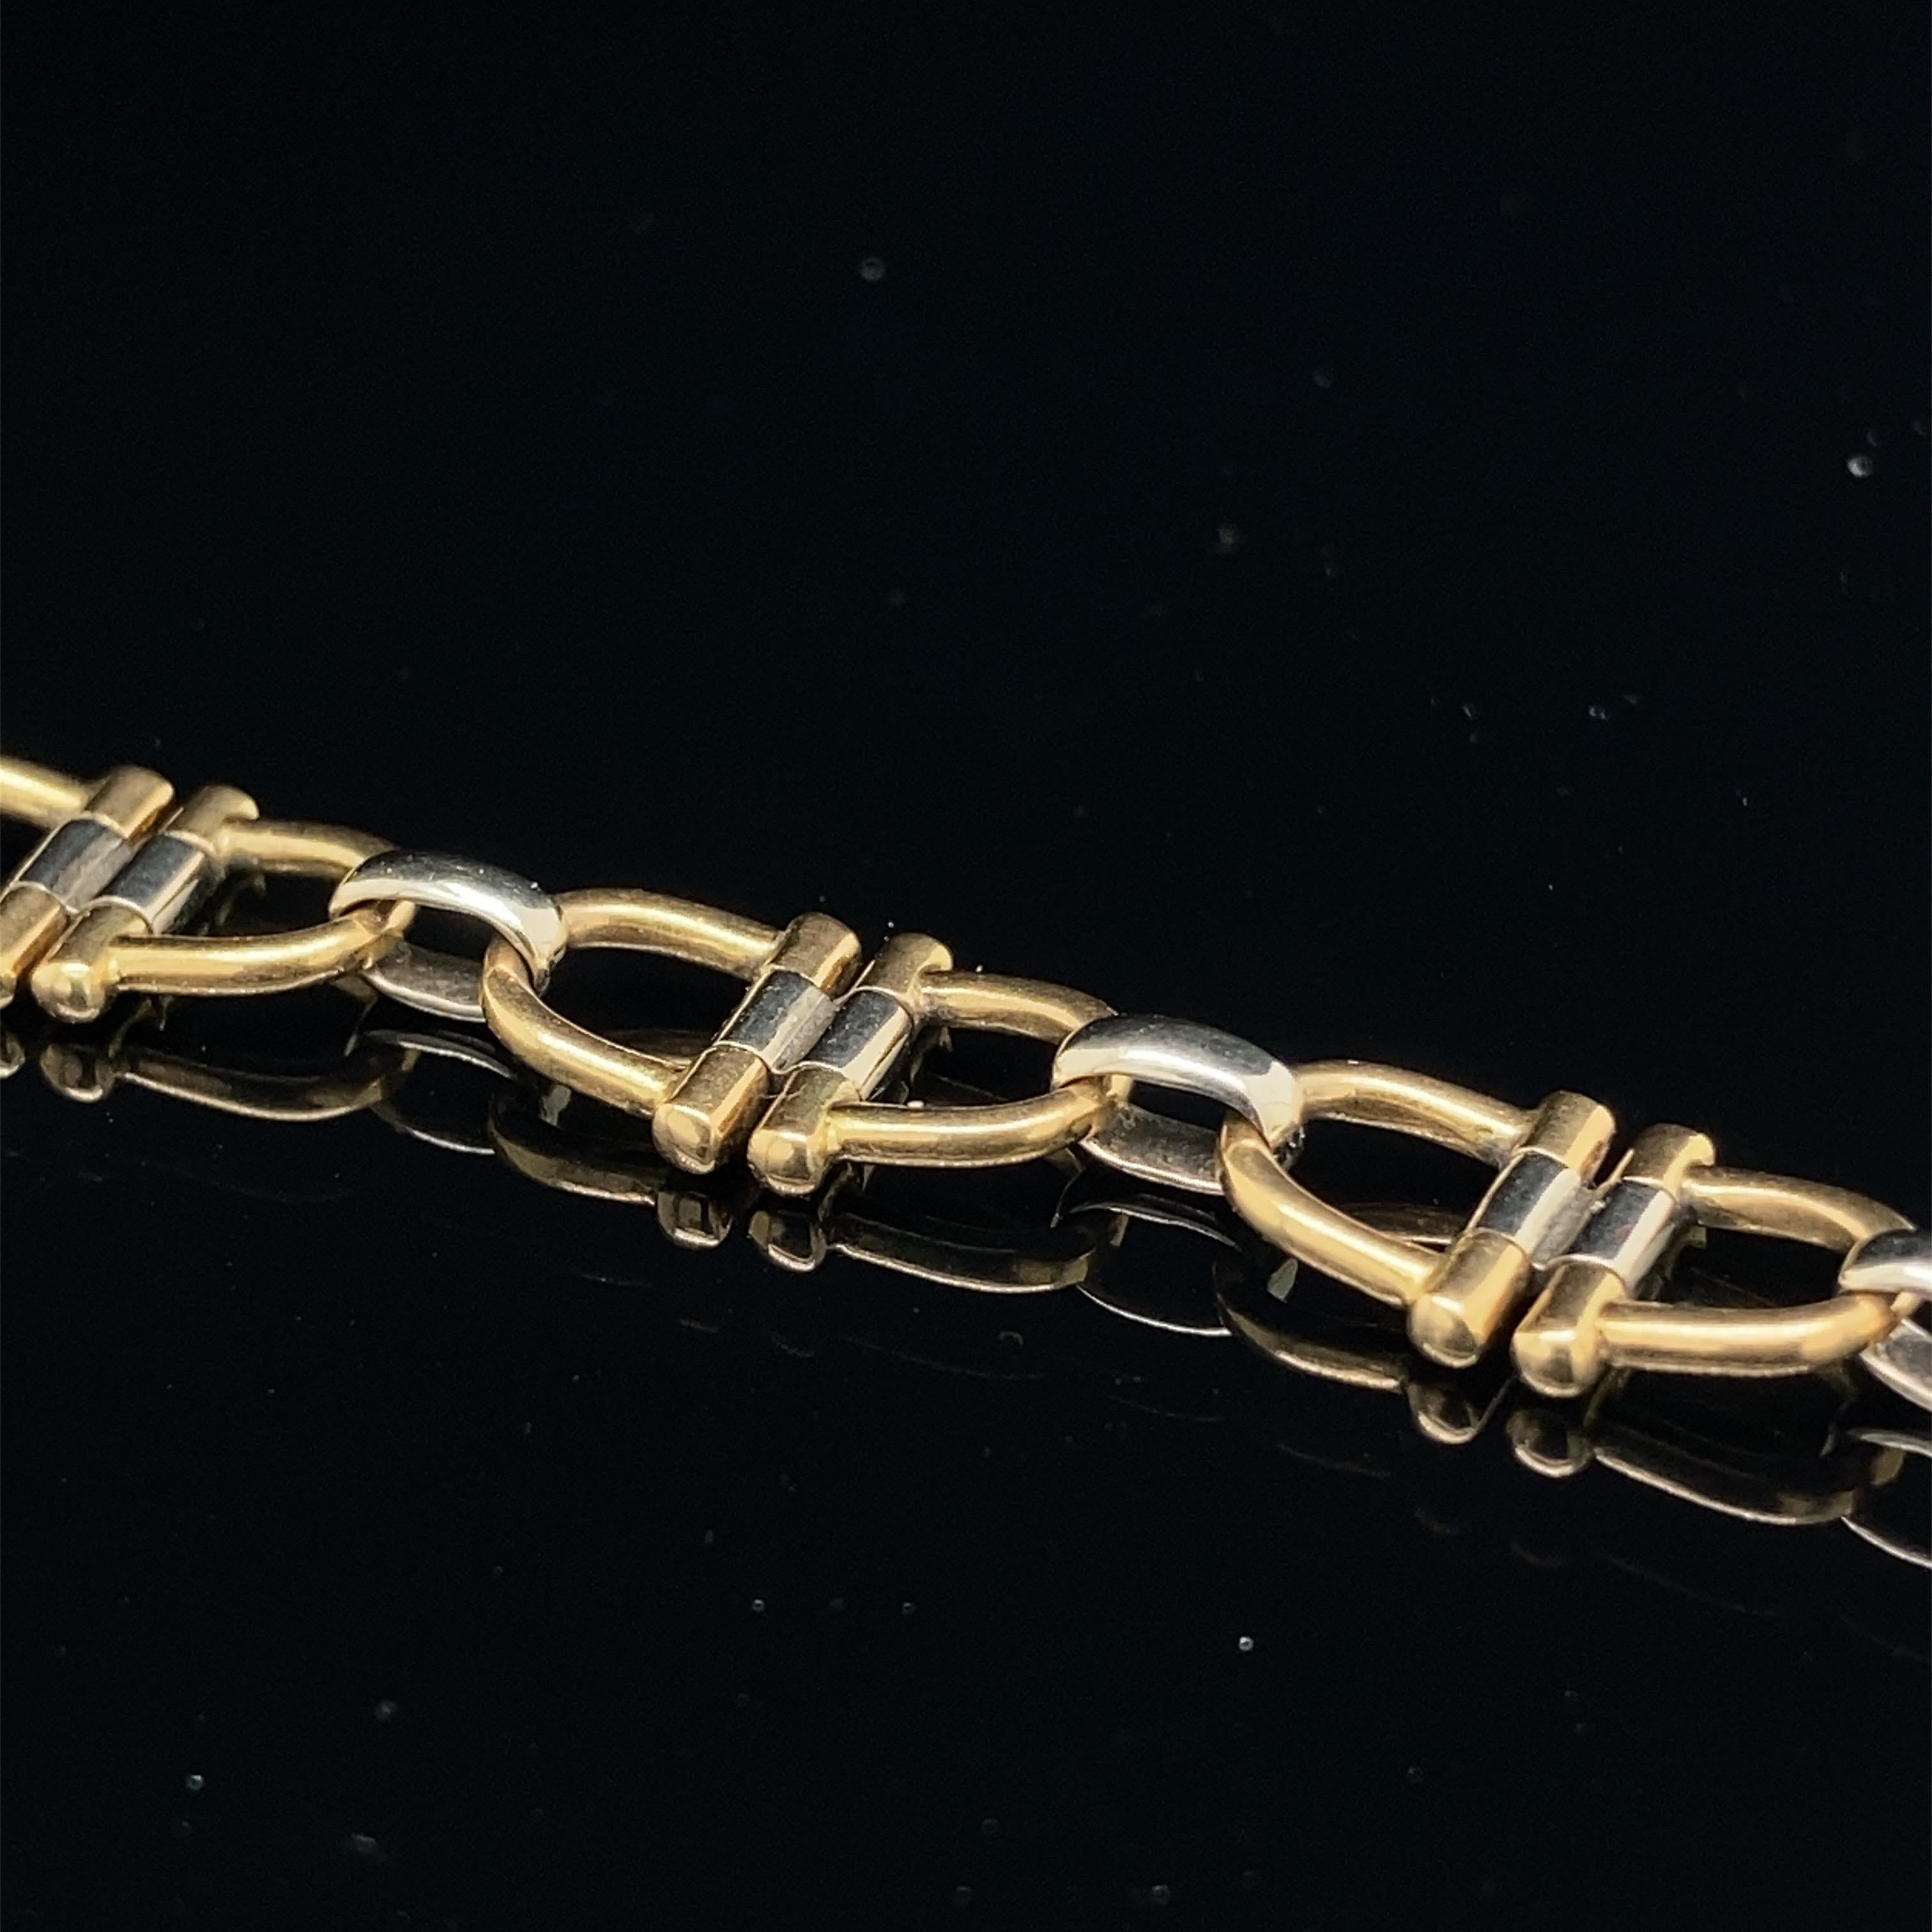 A delicate bicolour 18K gold Cartier bracelet, each element of stirrup shape. 
Signed Cartier and numbered 593765, marked 750.
The padlock clasp with additional safety closure.
19.5cm long
12.1g
With Cartier pouch and packaging.